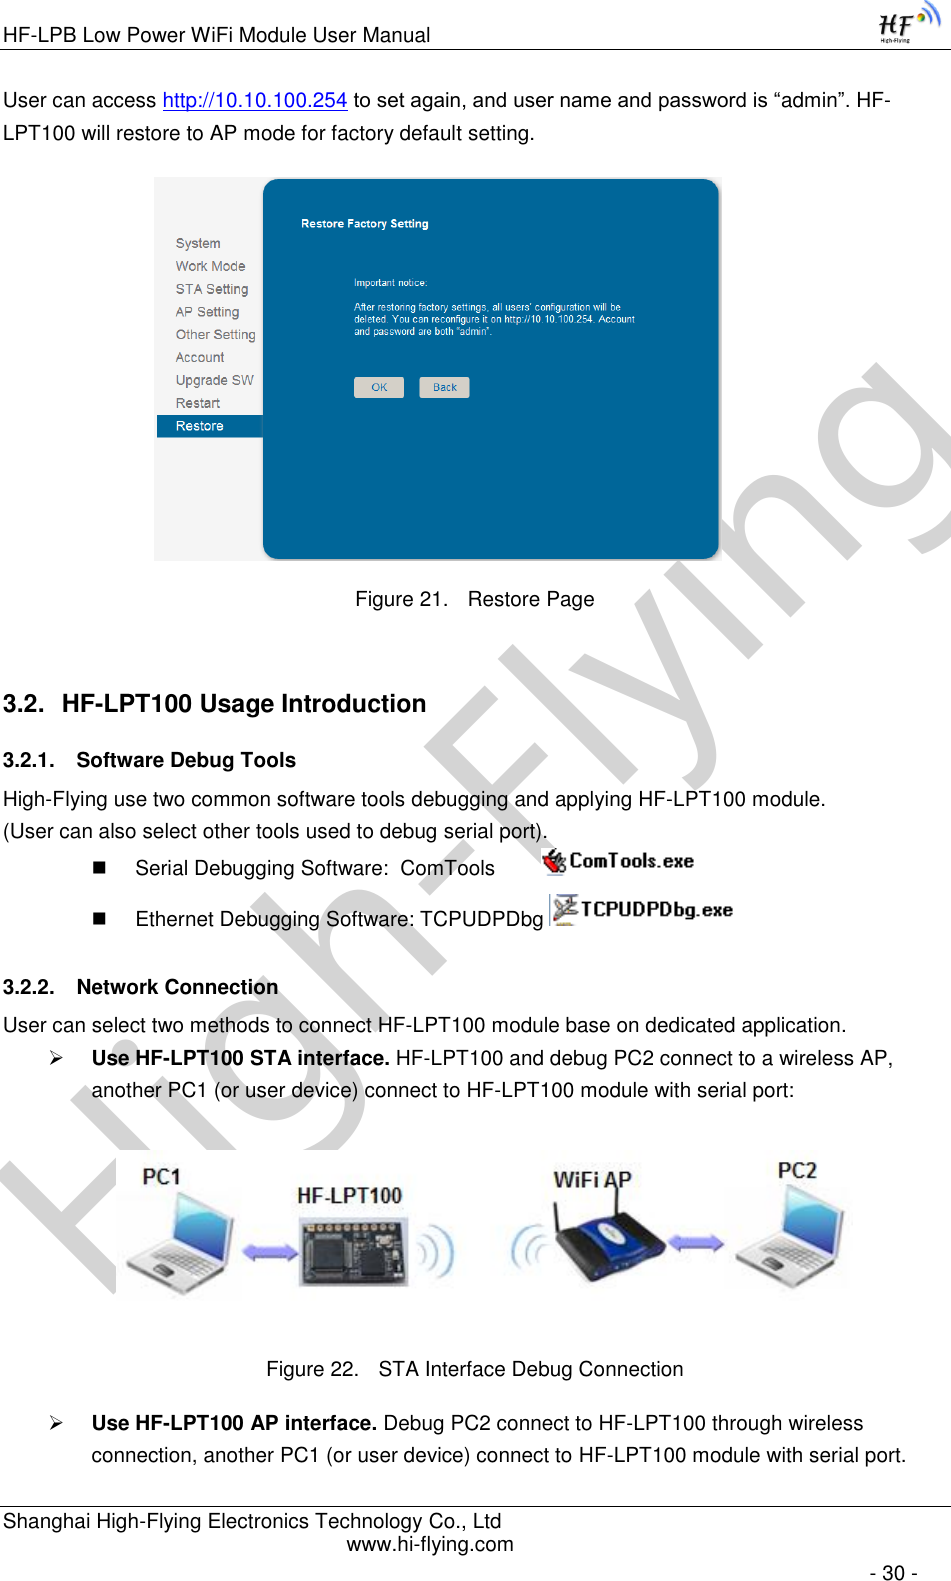 High-FlyingHF-LPB Low Power WiFi Module User Manual Shanghai High-Flying Electronics Technology Co., Ltd www.hi-flying.com   - 30 - User can access http://10.10.100.254 to set again, and user name and password is “admin”. HF-LPT100 will restore to AP mode for factory default setting.                      Figure 21. Restore Page 3.2. HF-LPT100 Usage Introduction 3.2.1. Software Debug Tools High-Flying use two common software tools debugging and applying HF-LPT100 module.  (User can also select other tools used to debug serial port).  Serial Debugging Software:  ComTools           Ethernet Debugging Software: TCPUDPDbg   3.2.2. Network Connection User can select two methods to connect HF-LPT100 module base on dedicated application.  Use HF-LPT100 STA interface. HF-LPT100 and debug PC2 connect to a wireless AP, another PC1 (or user device) connect to HF-LPT100 module with serial port:   Figure 22. STA Interface Debug Connection  Use HF-LPT100 AP interface. Debug PC2 connect to HF-LPT100 through wireless connection, another PC1 (or user device) connect to HF-LPT100 module with serial port. 